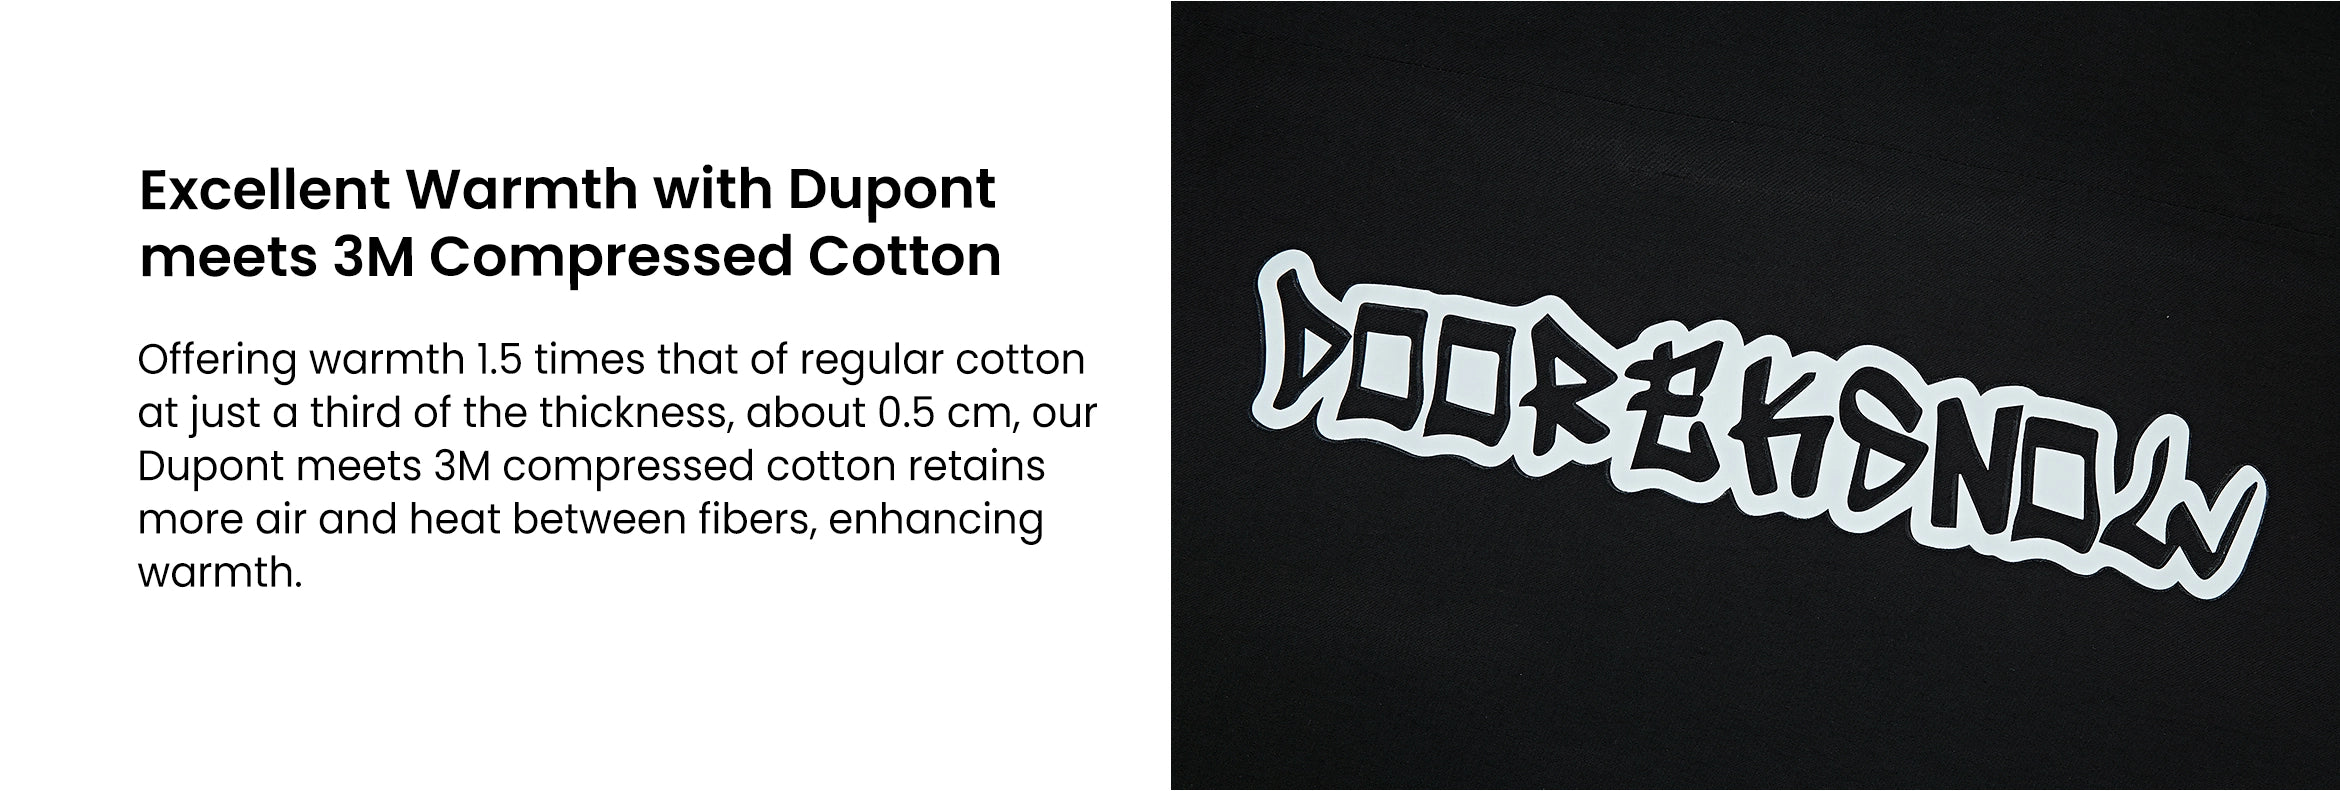 11. Excellent Warmth with Dupont meets 3M Compressed Cotton